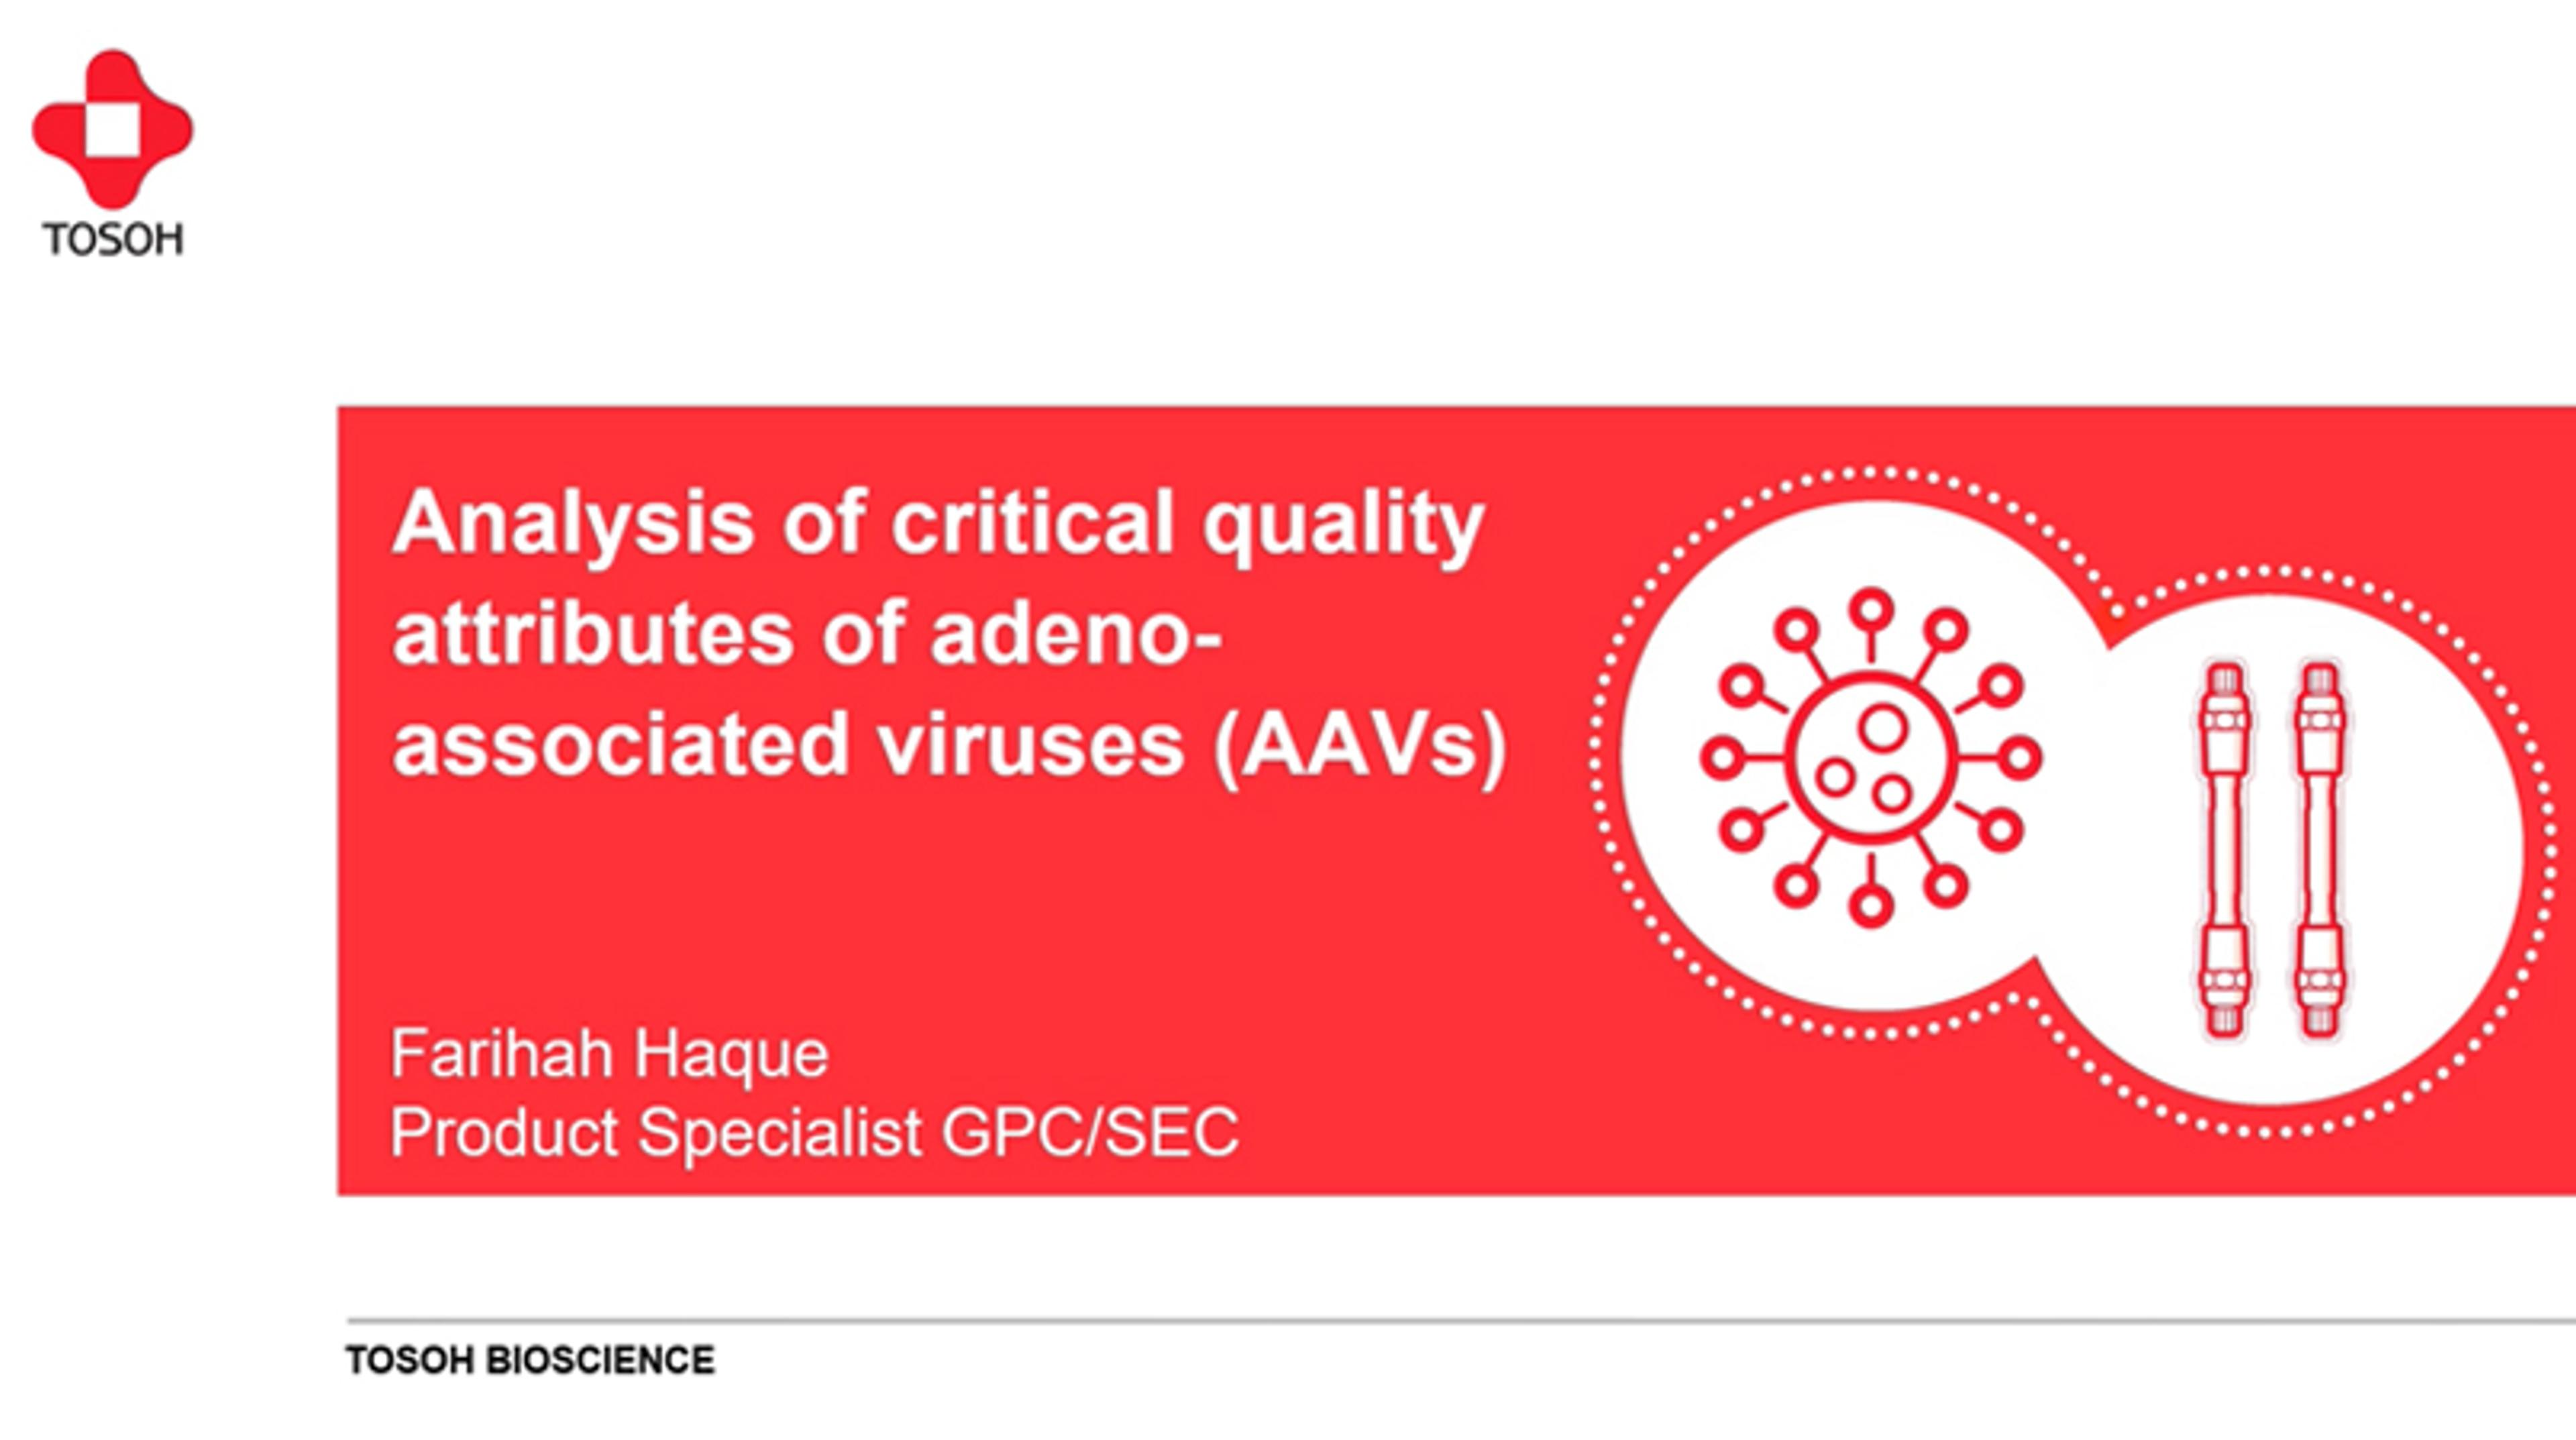 Analysis of critical quality attributes of adeno-associated viruses – AAVs